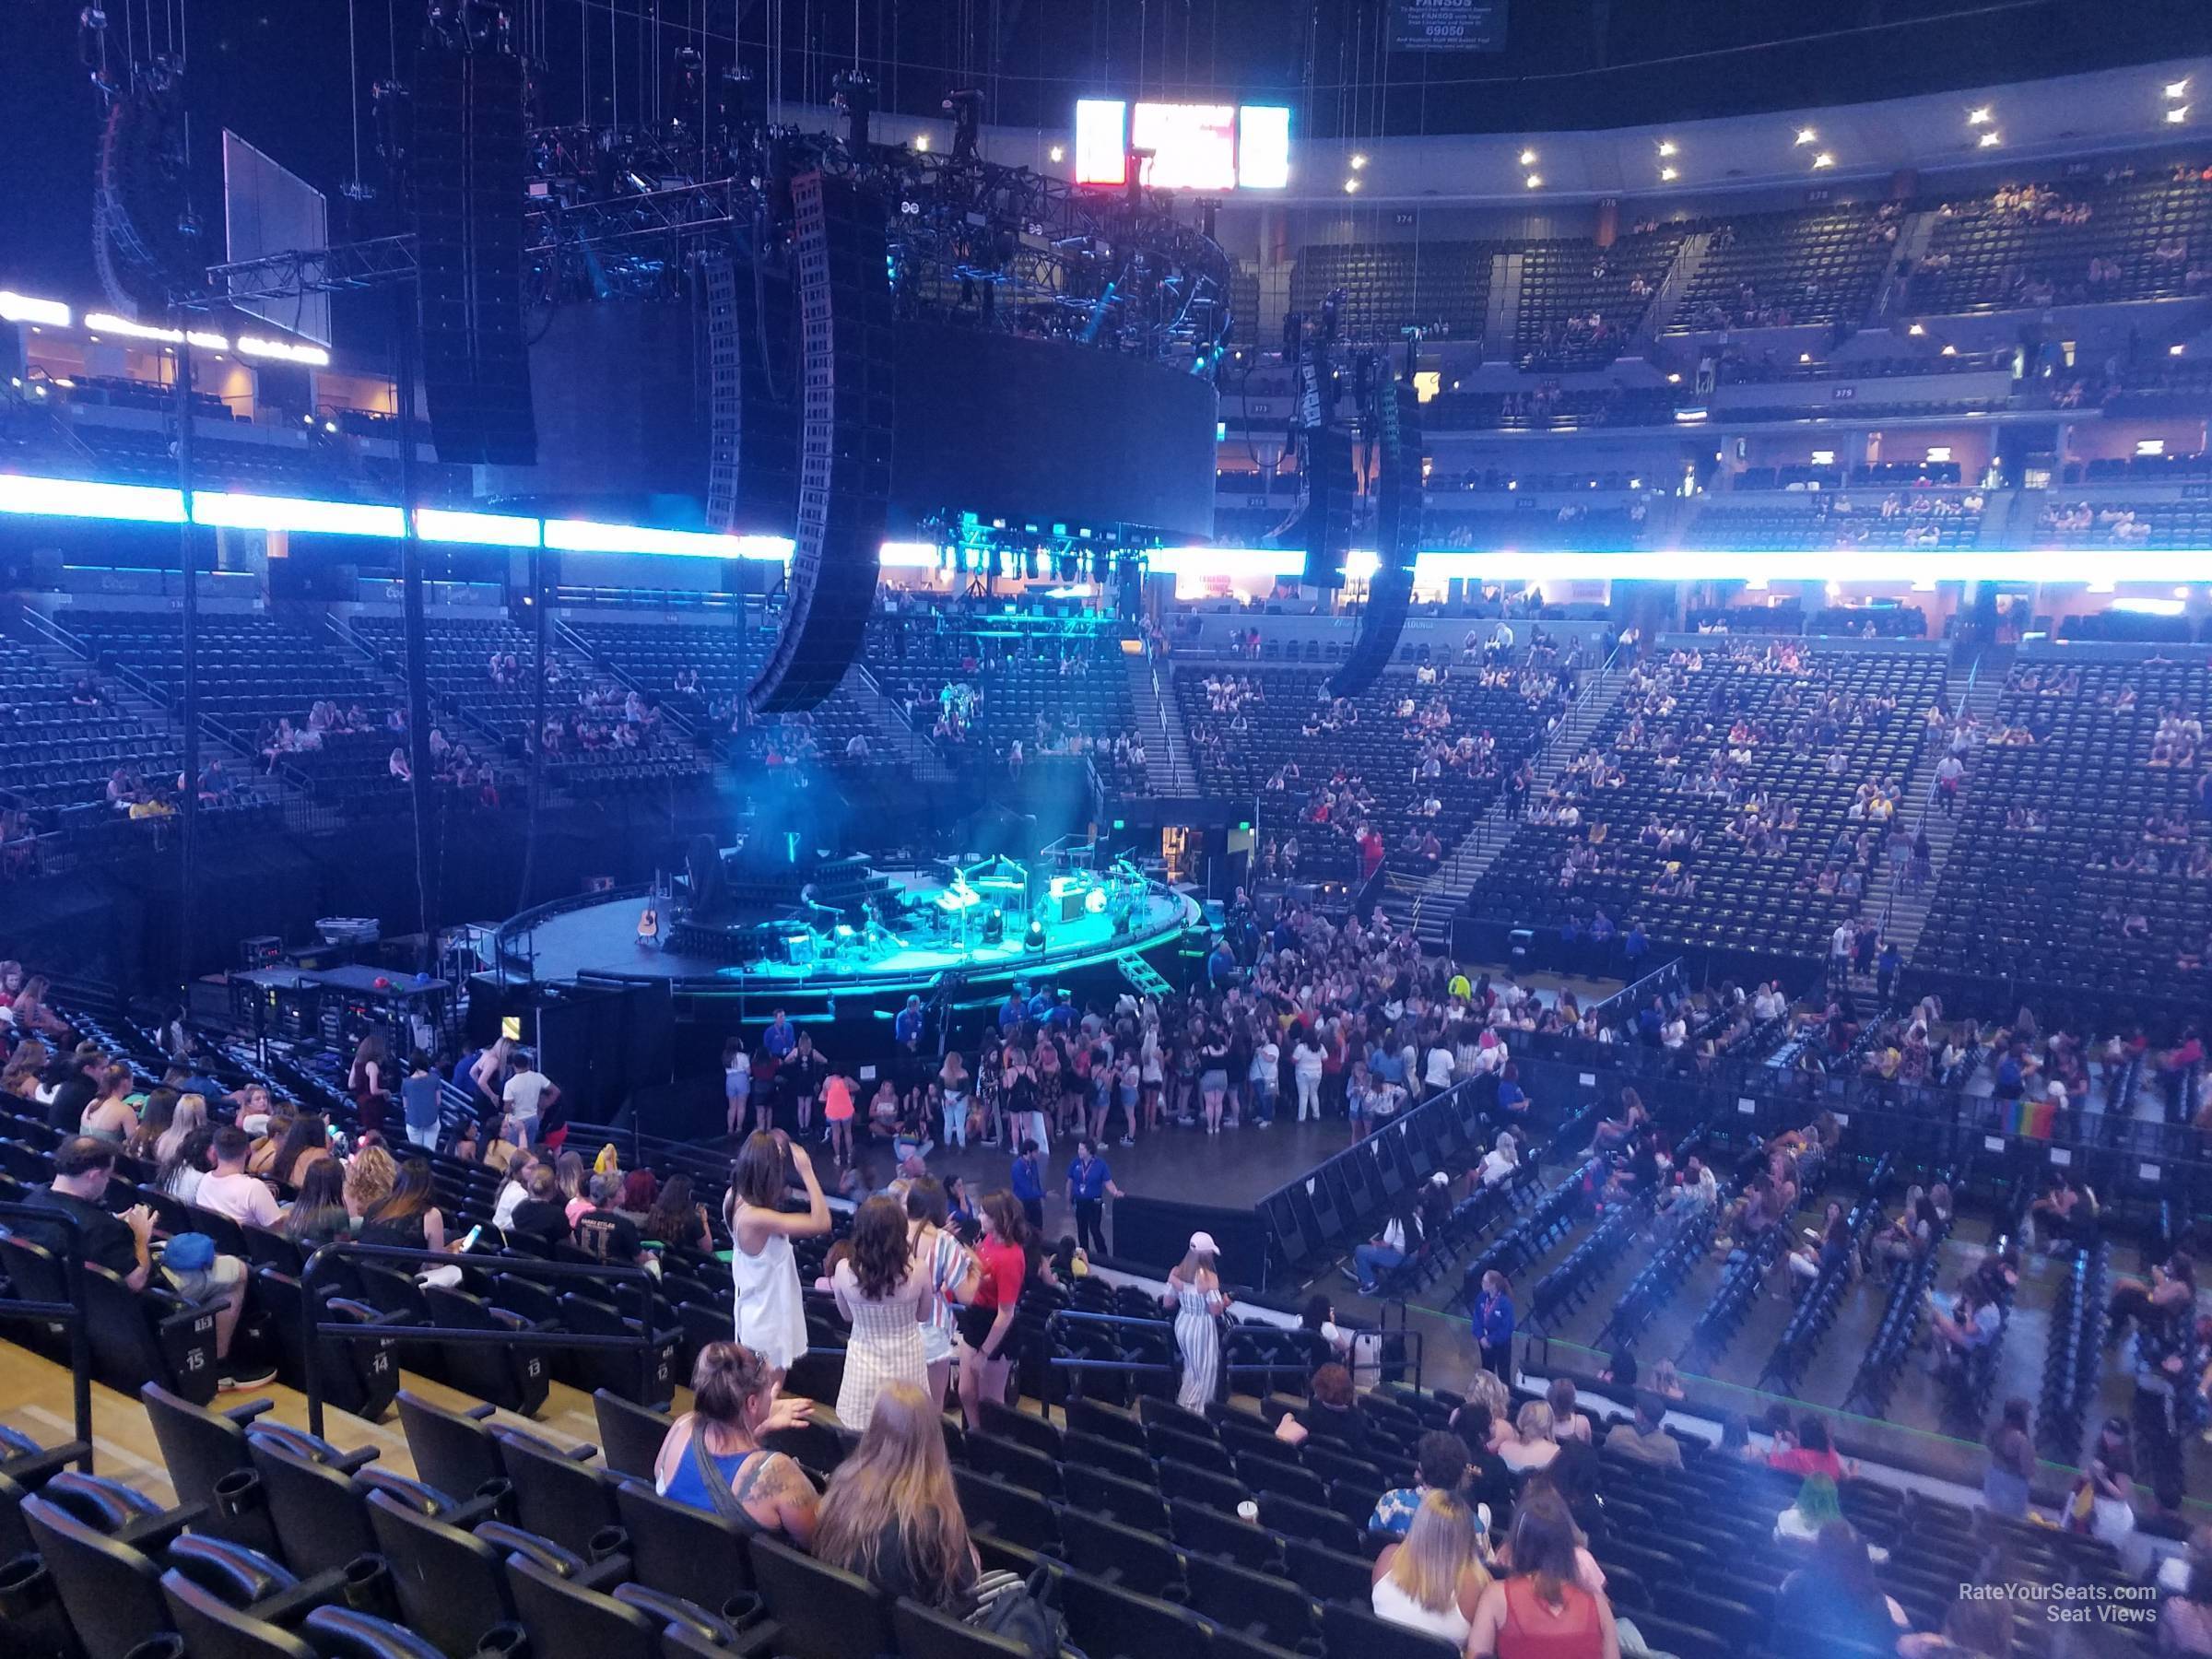 section 126, row 19 seat view  for concert - ball arena